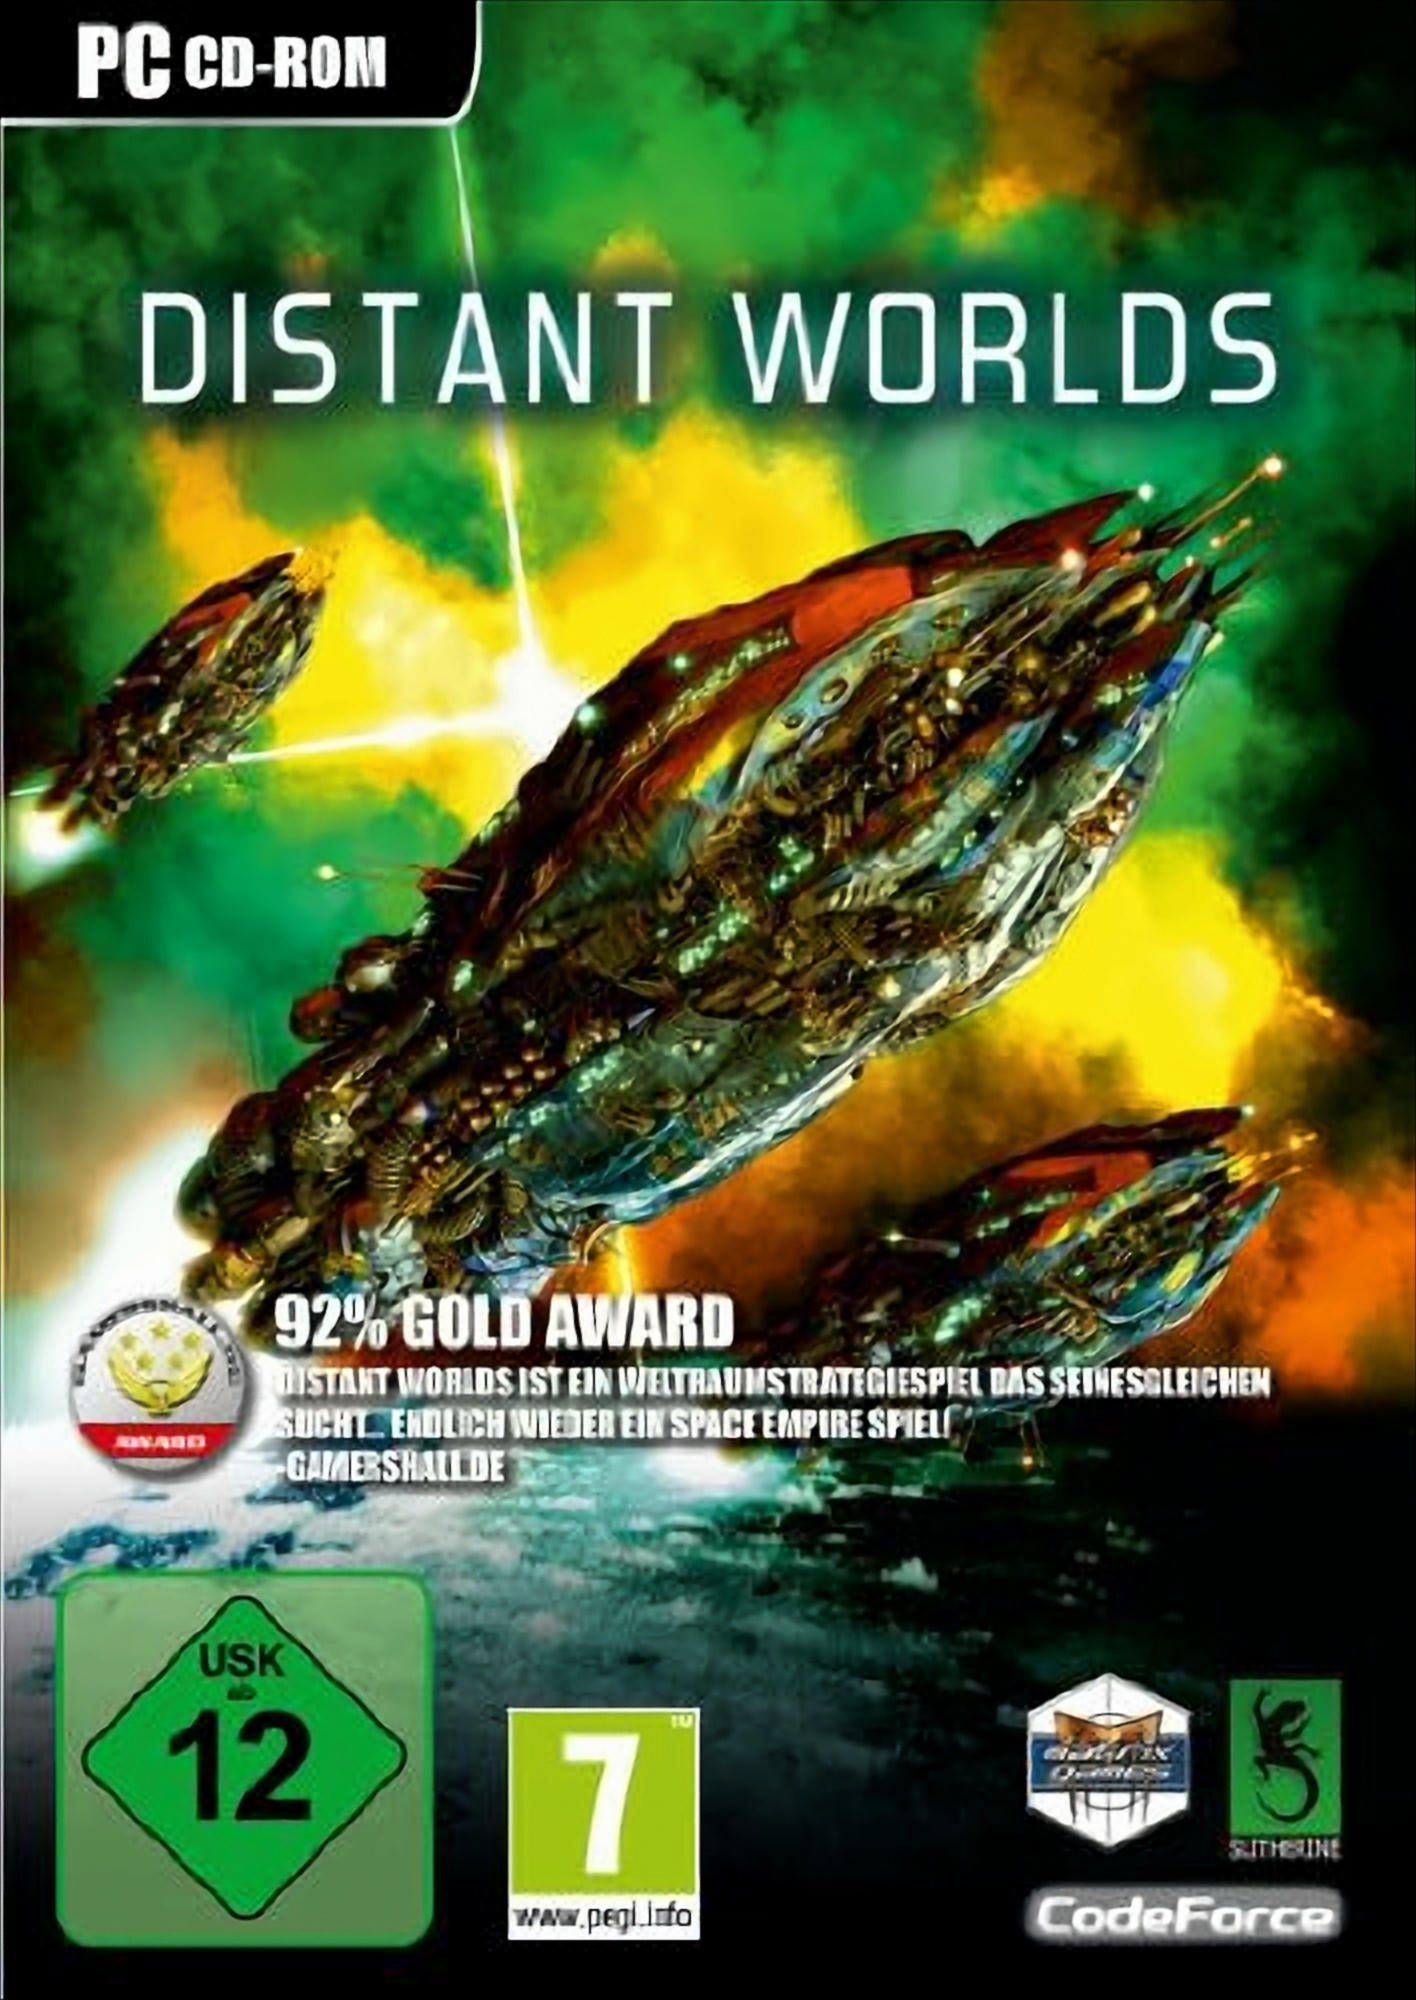 Worlds [PC] Distant -